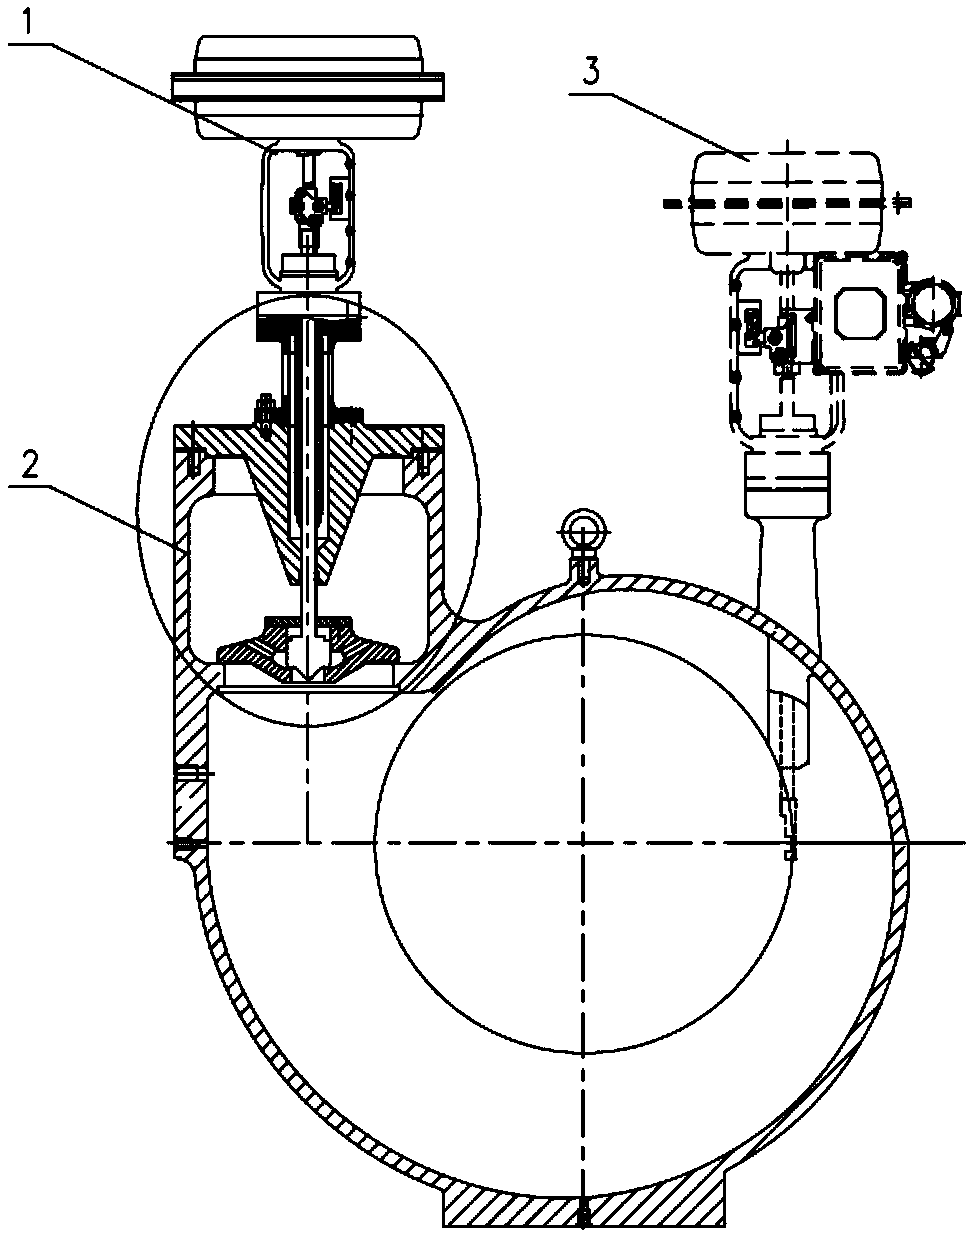 Volute of turbo-expander